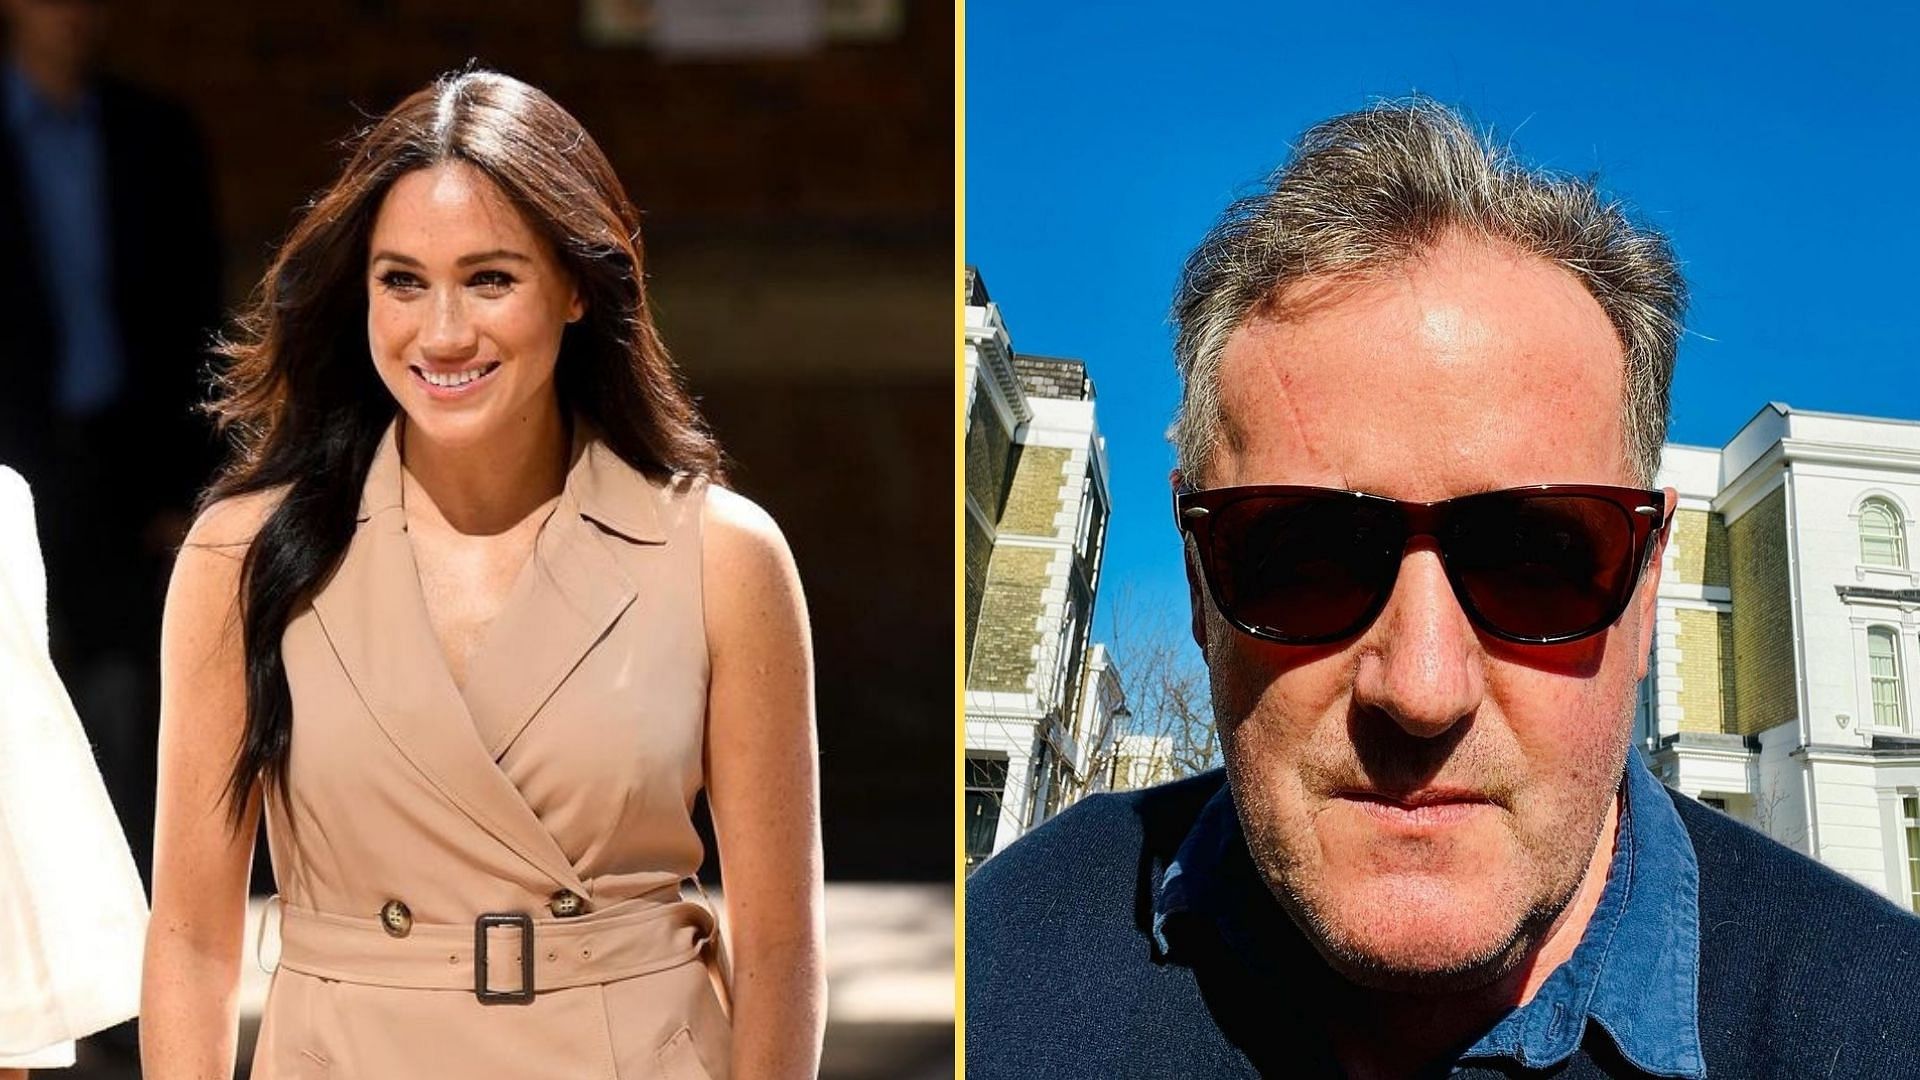  <p>Meghan Markle had reportedly filed a complaint against Piers Morgan.</p>